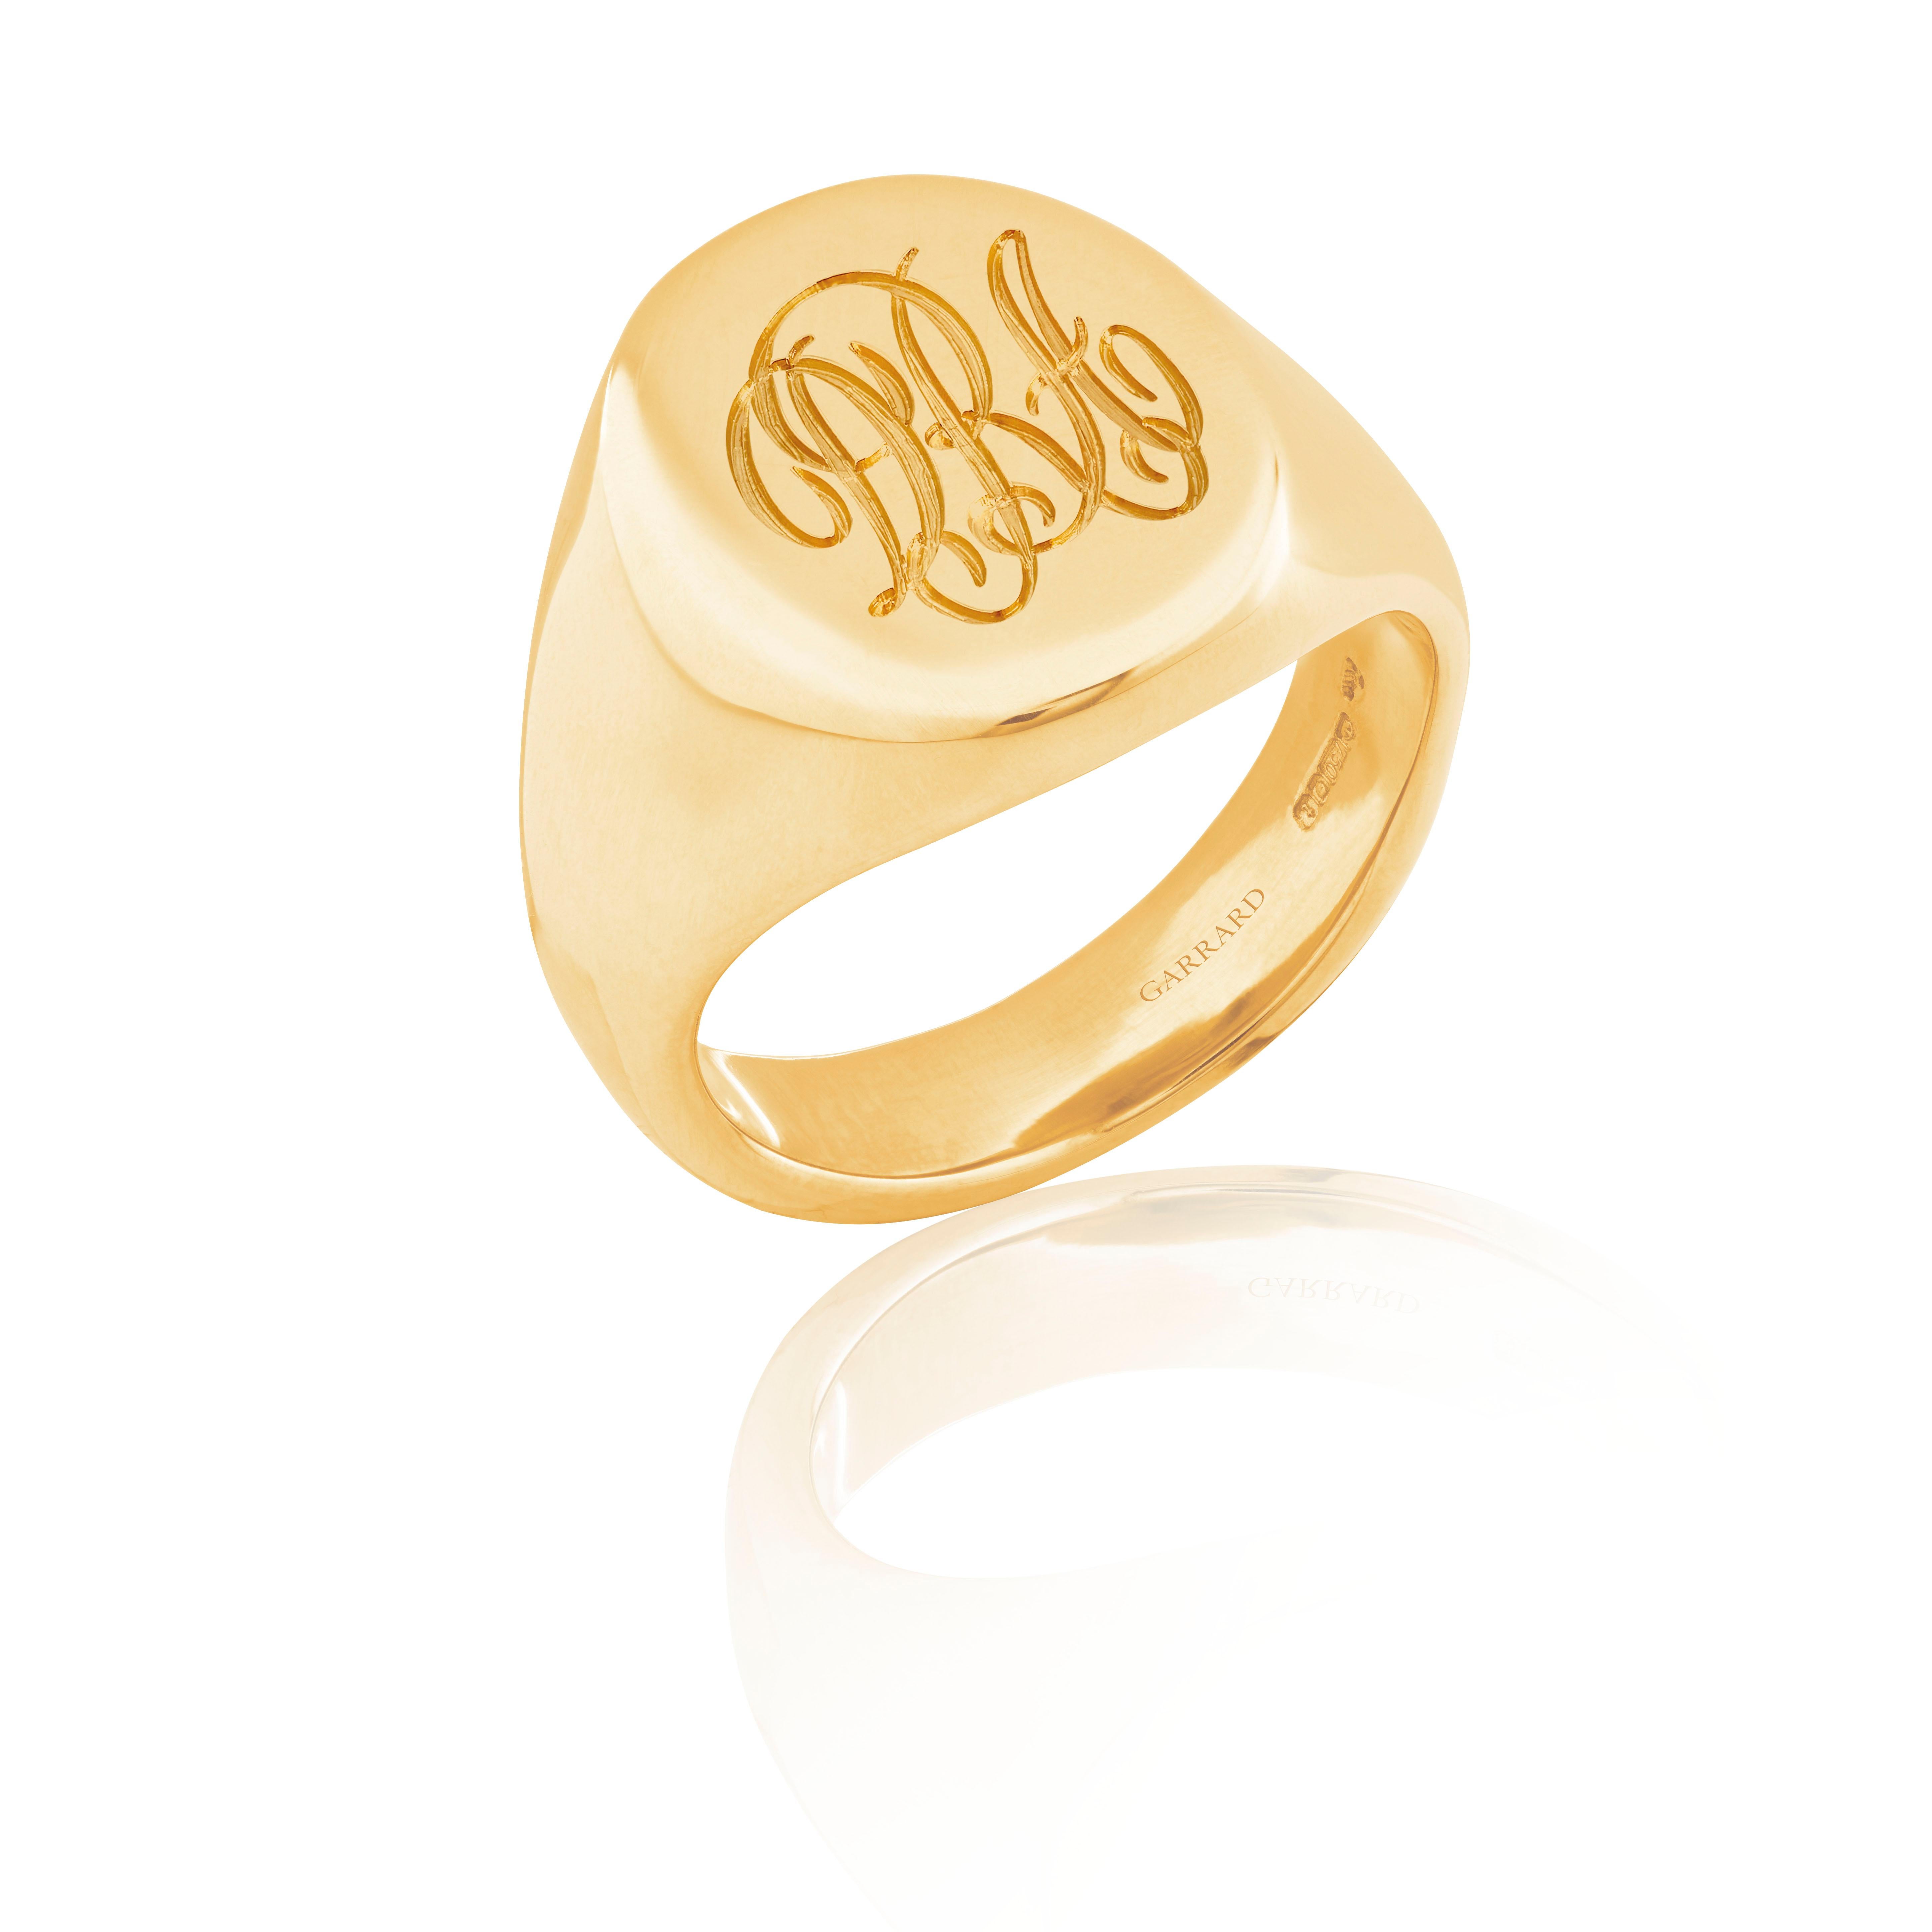 A House of Garrard 18 karat yellow gold medium oval signet ring.

Head dimension: 14mm x 12mm
Size 52

Complimentary engraving of up to three initials in a script font is included. Please allow an additional two weeks to the standard shipping and